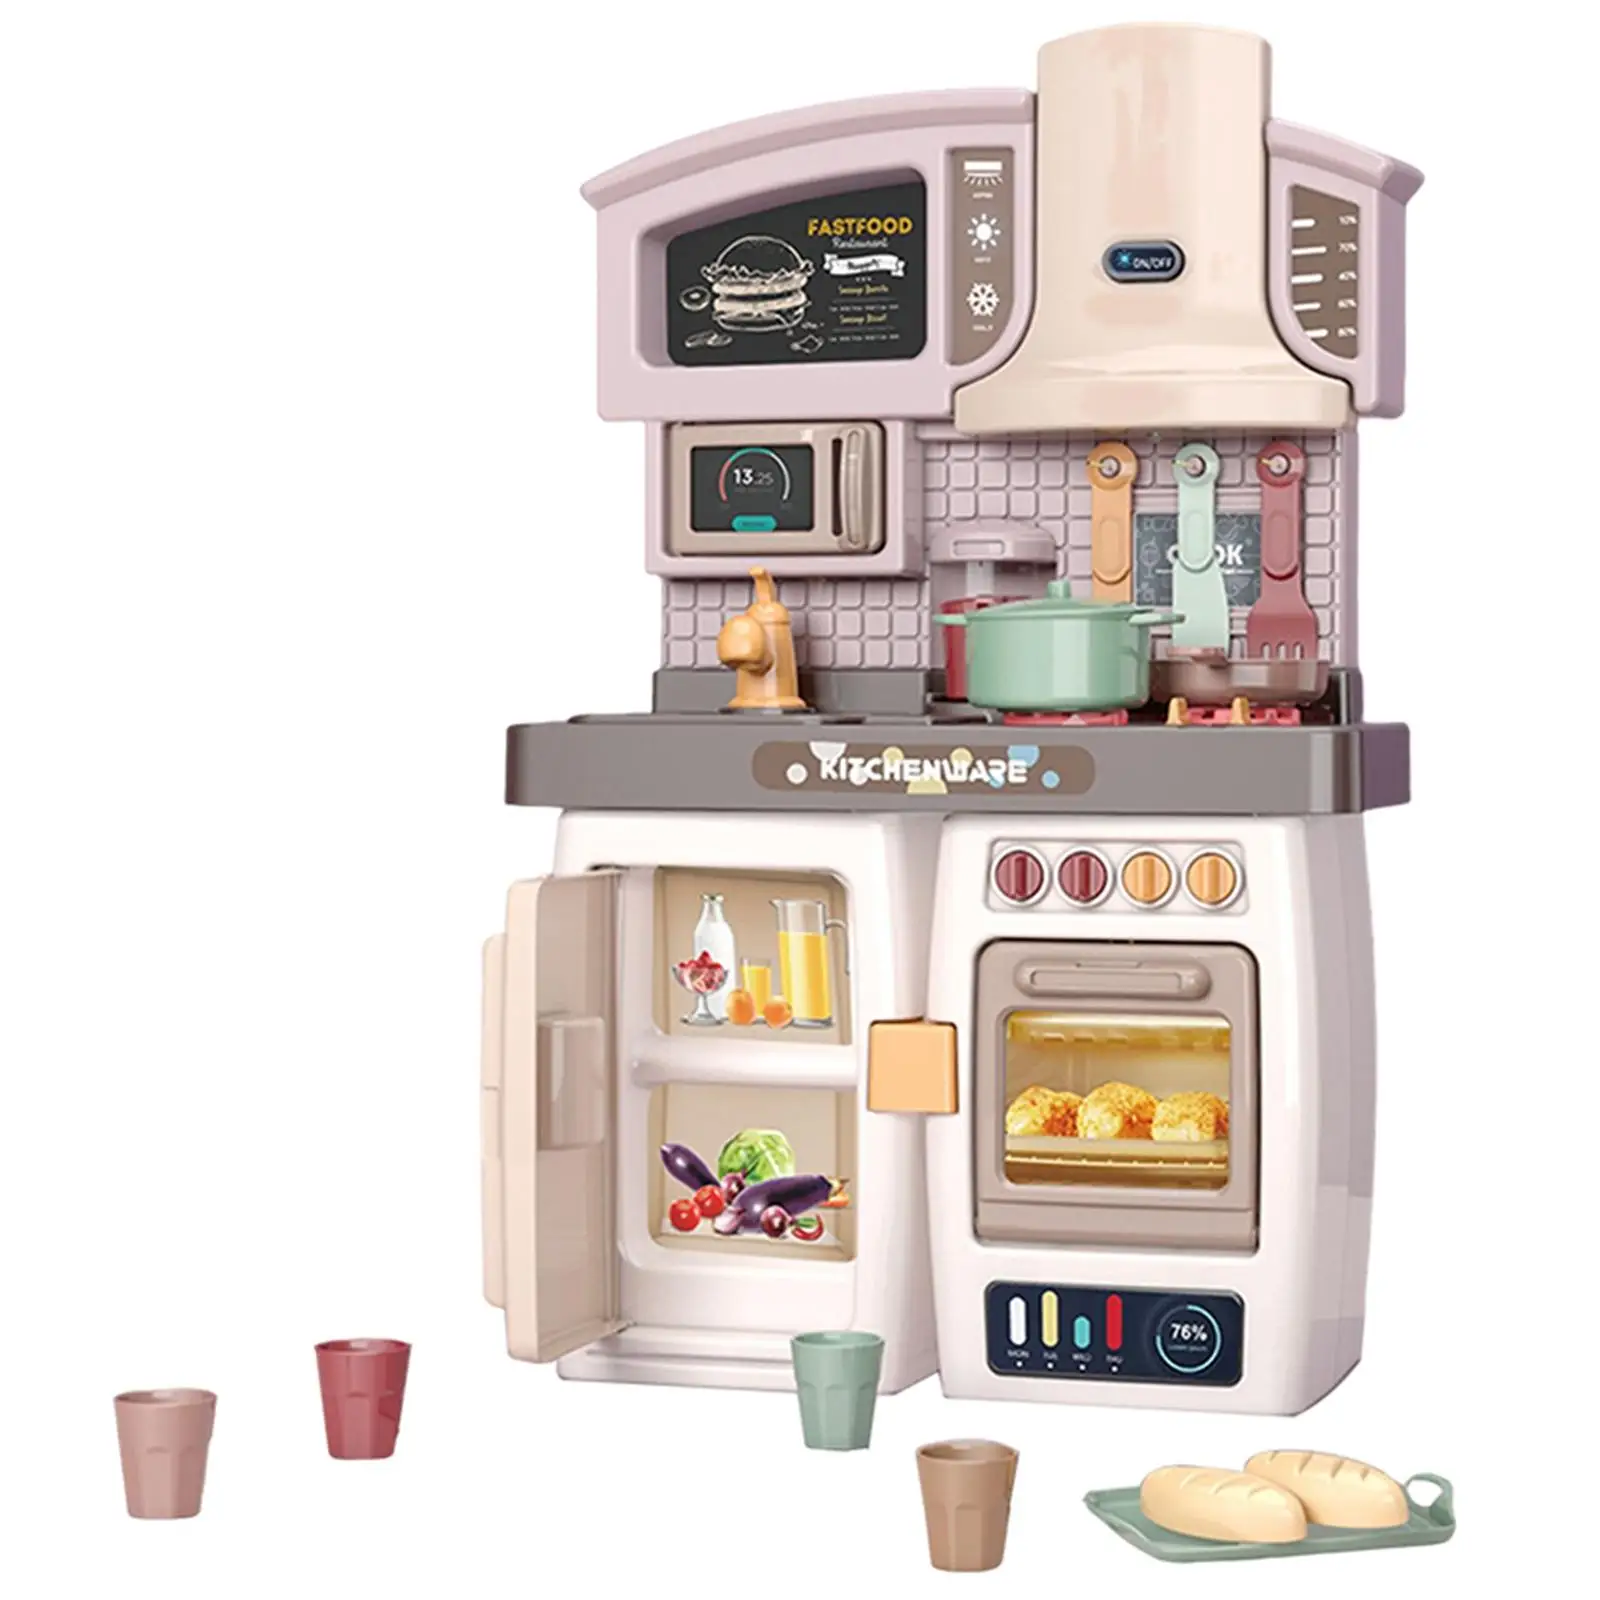 Kids Kitchen Playset Simulation Educational Cook Appliances Play Kitchen Set for Birthday Interactive Game Ceremony Boys Girls